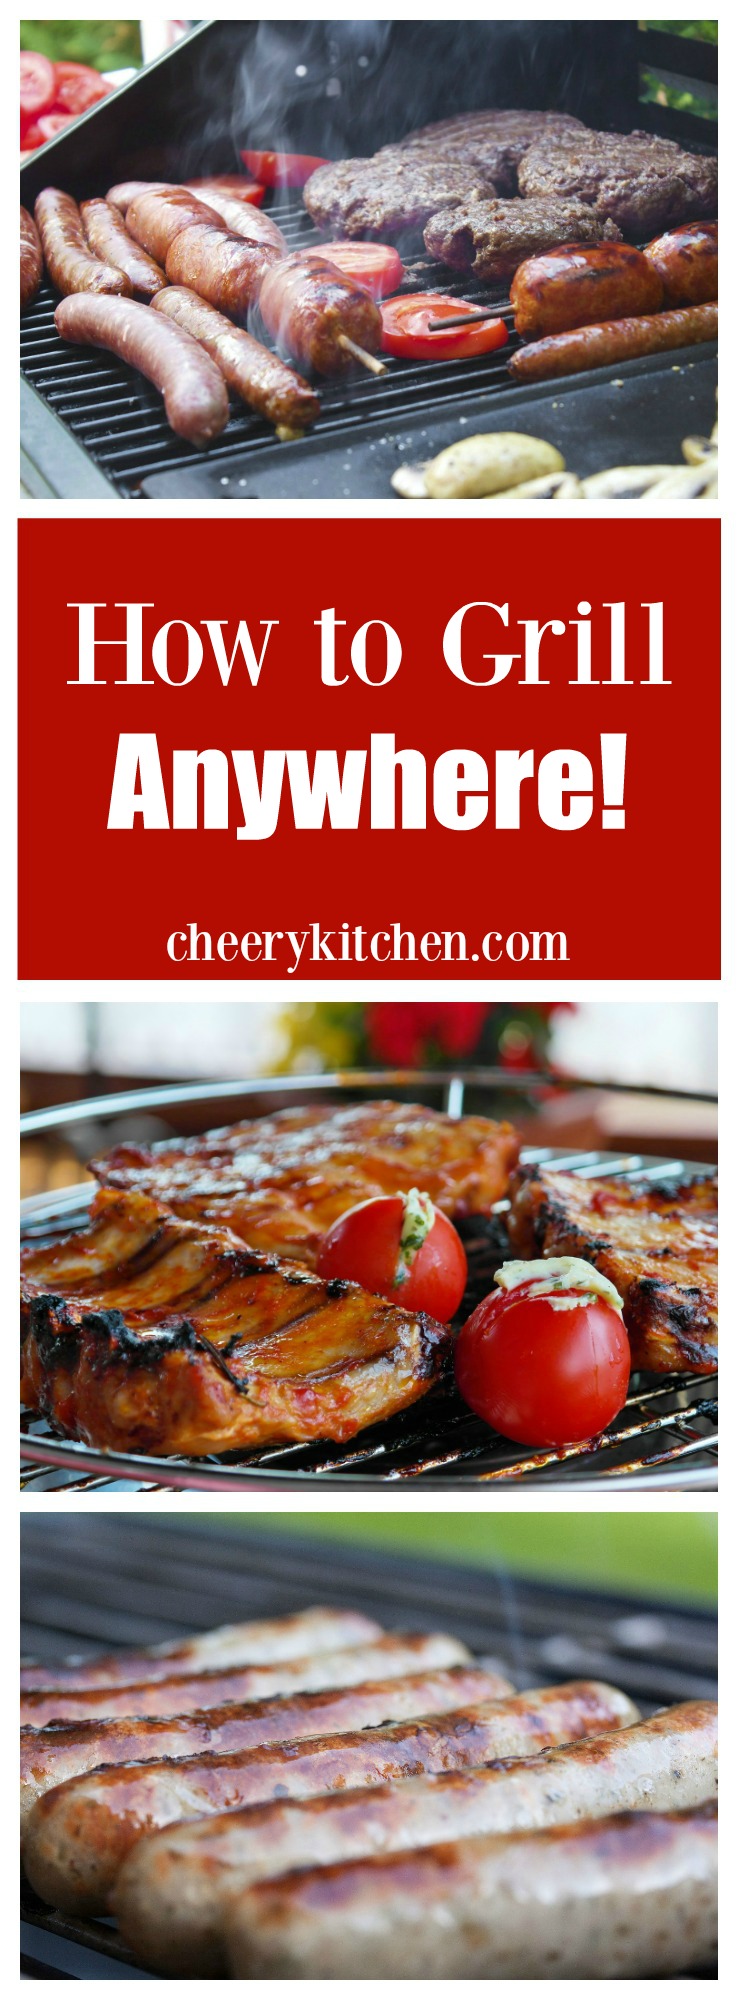 It is possible to grill anywhere your heart desires! Learn how to grill at picnics, tailgaiting and even on the beach! - Cheerykitchen.com